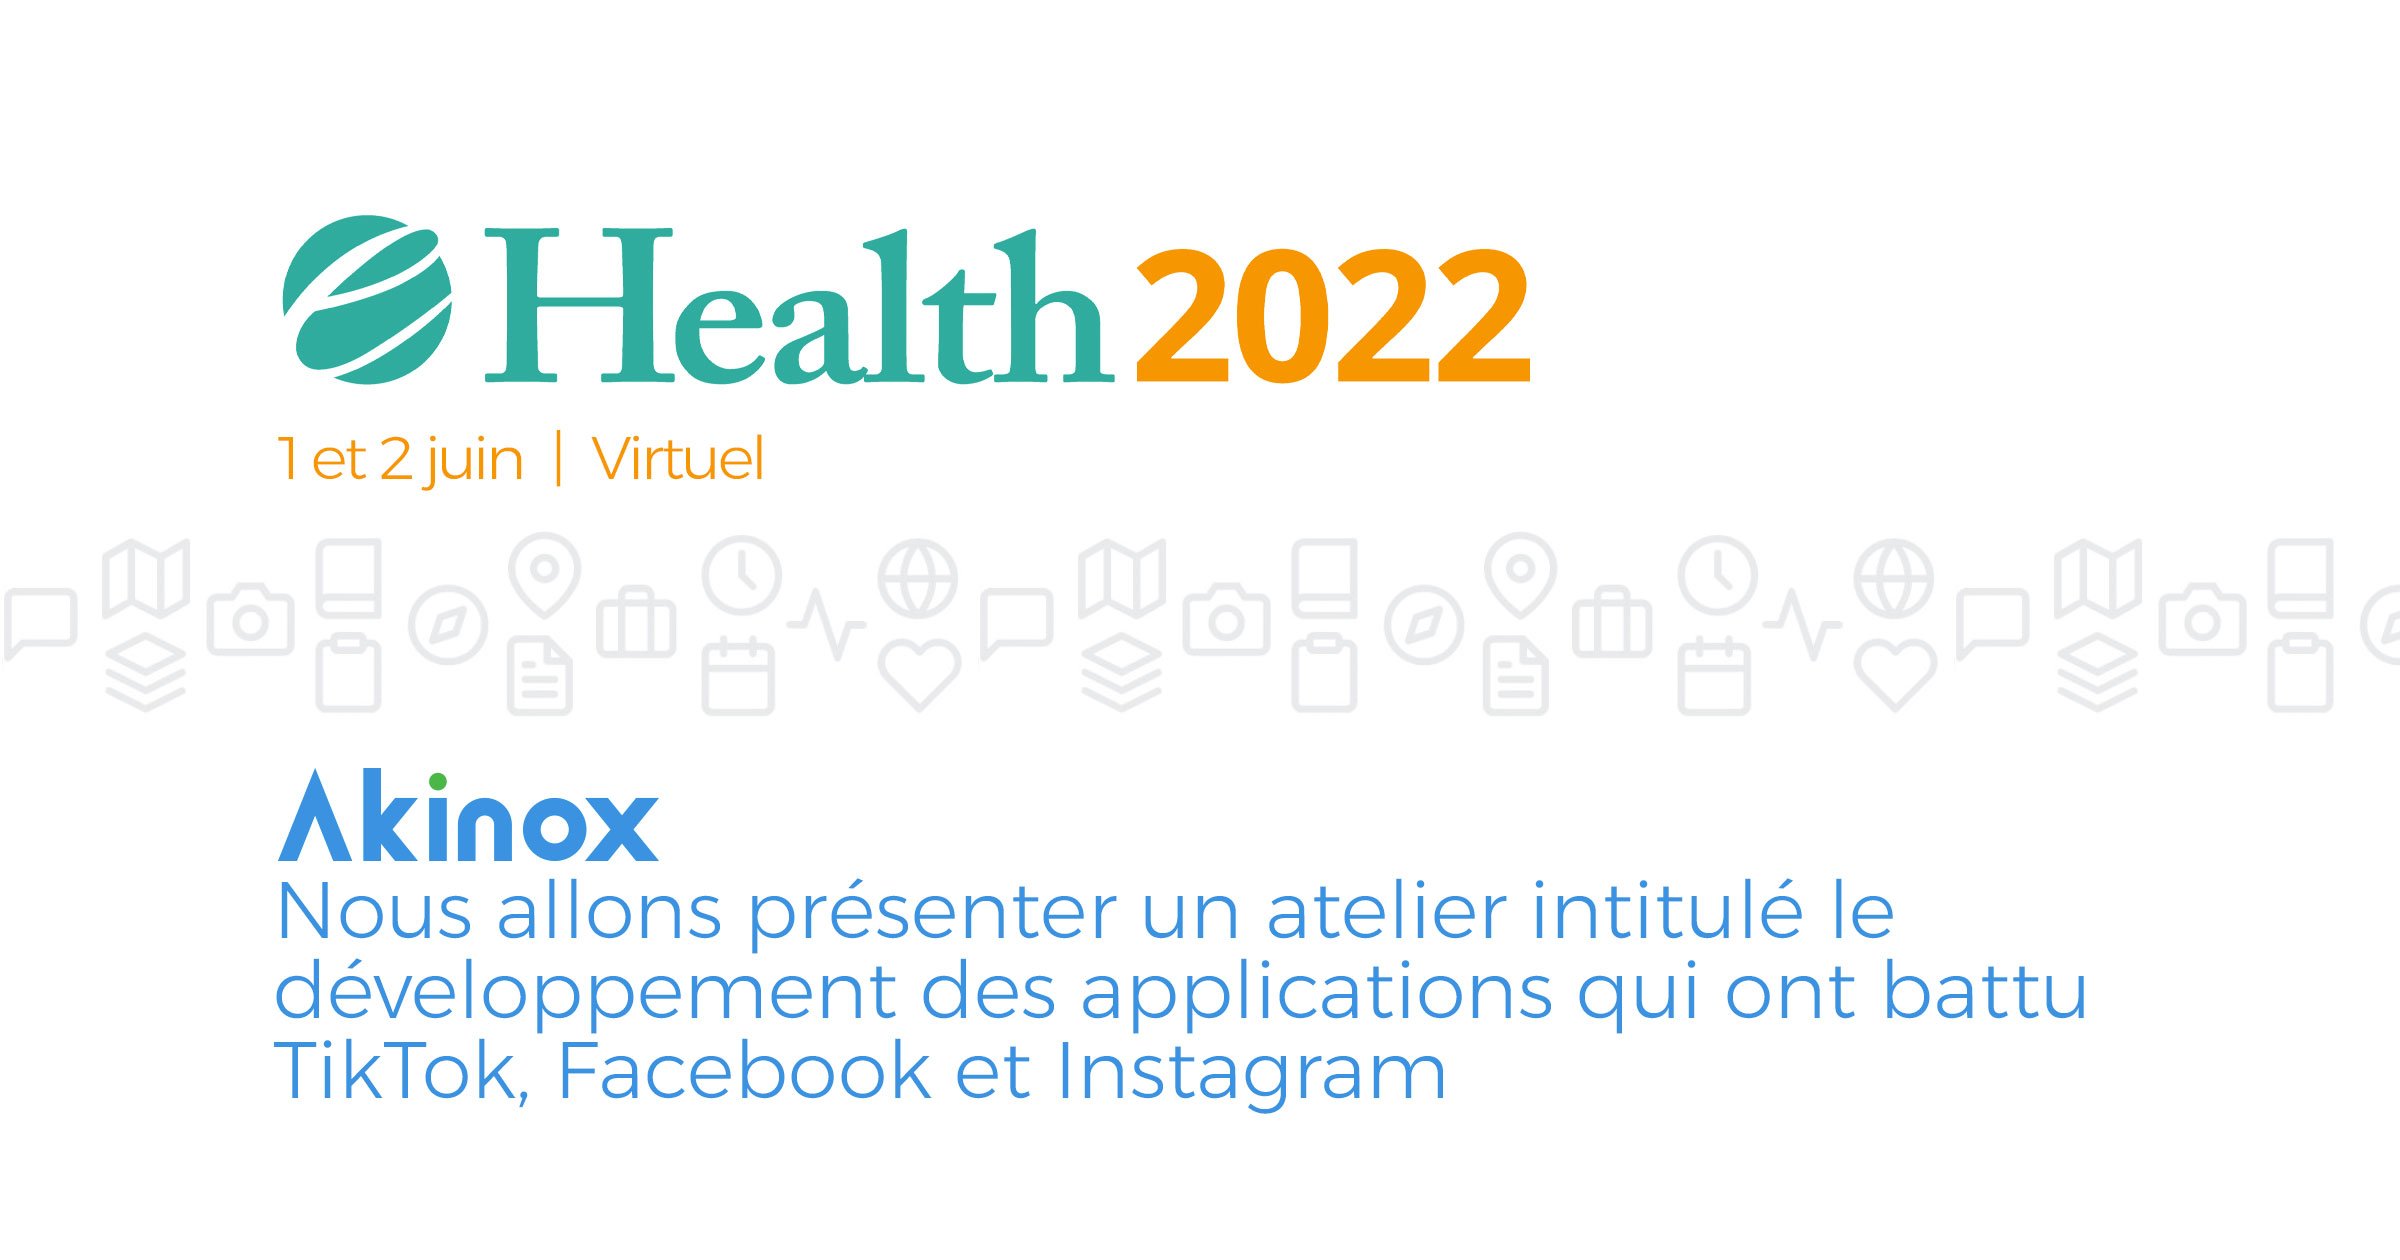 For_Top_of_Page-EVENT-IMAGE-eHealth2022-20220601-2400x1260-Q60-FR-1